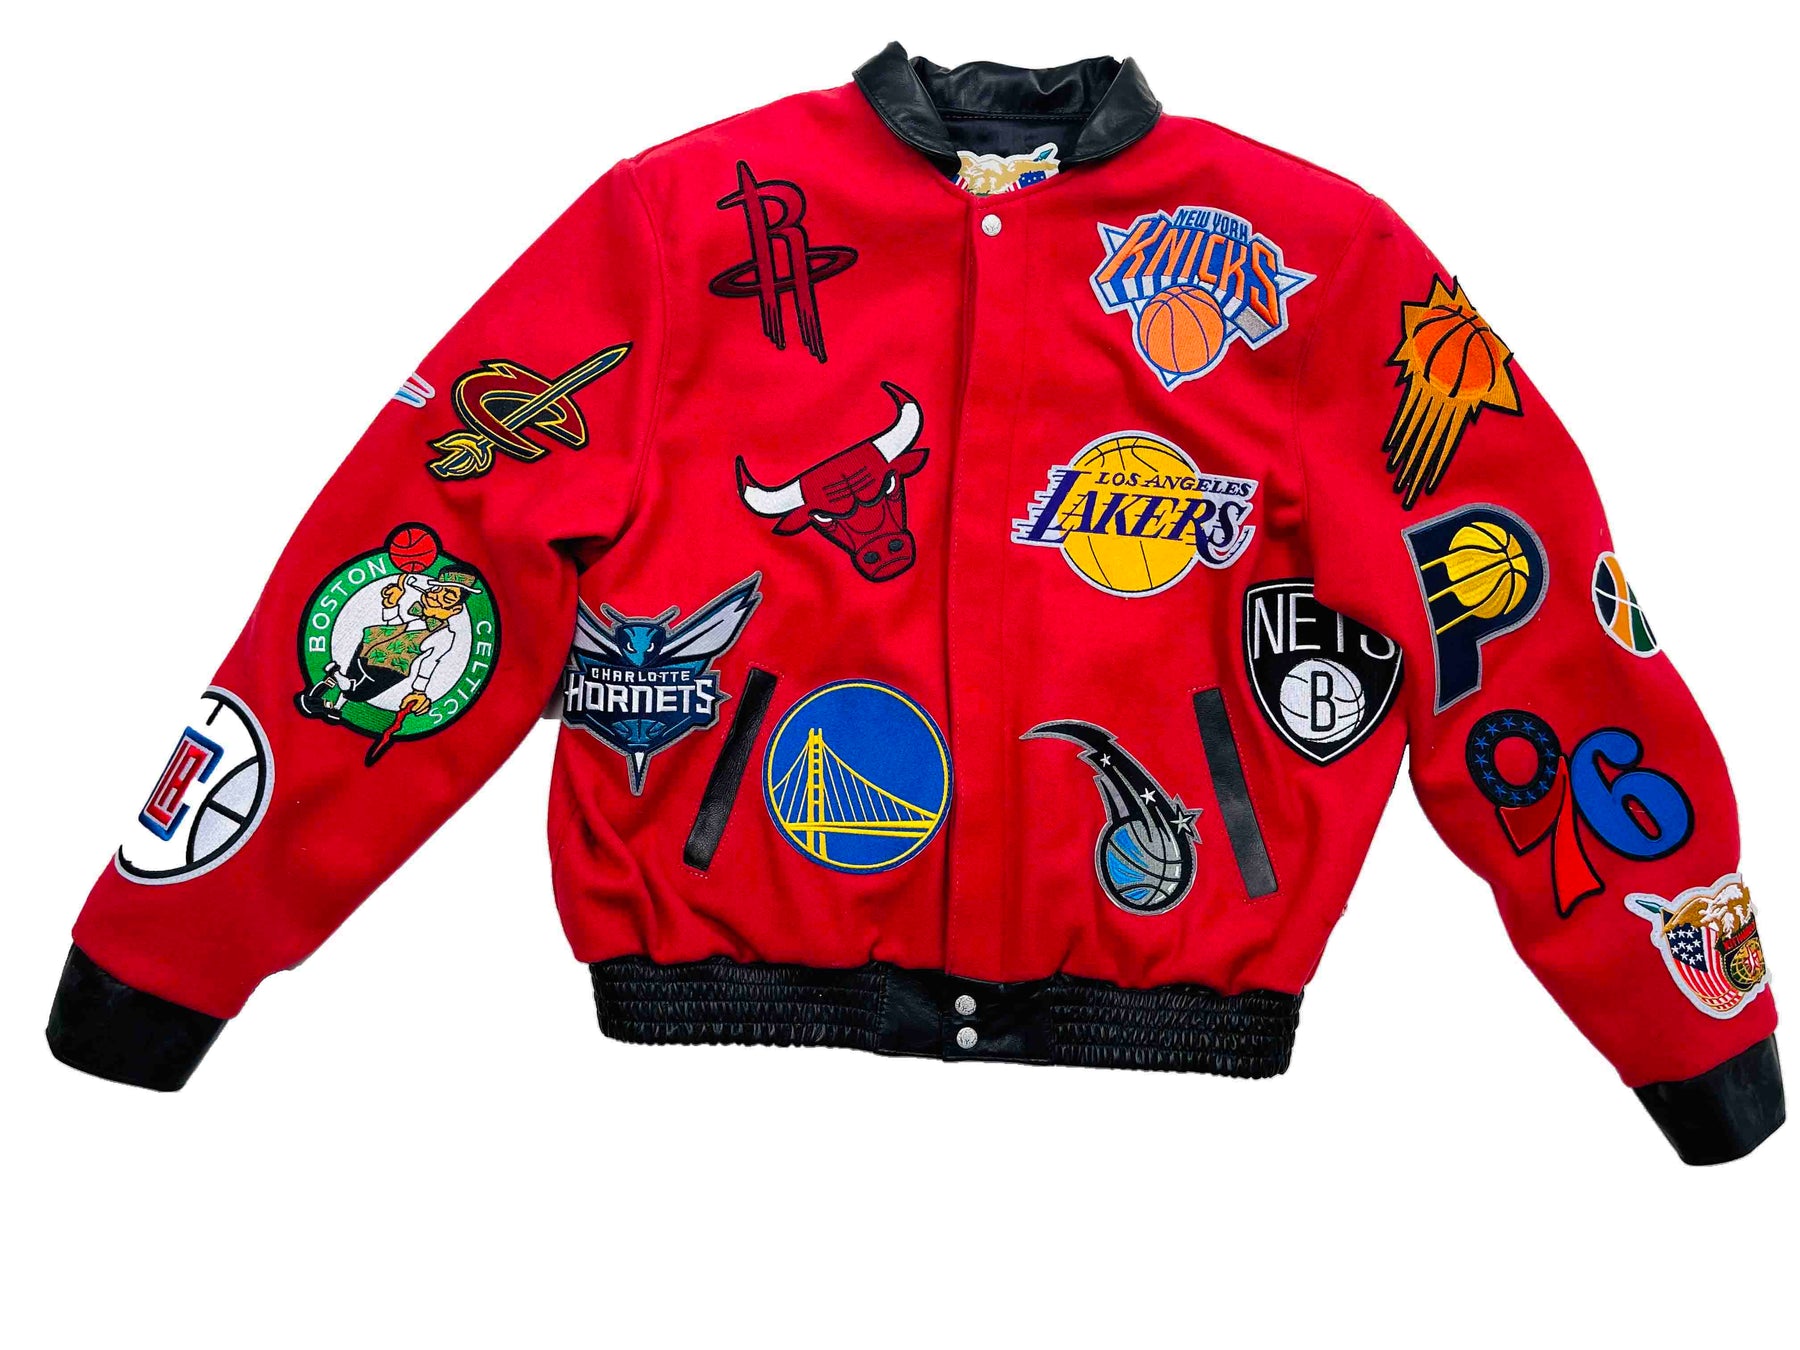 NBA COLLAGE WOOL & LEATHER JACKET Baby Blue